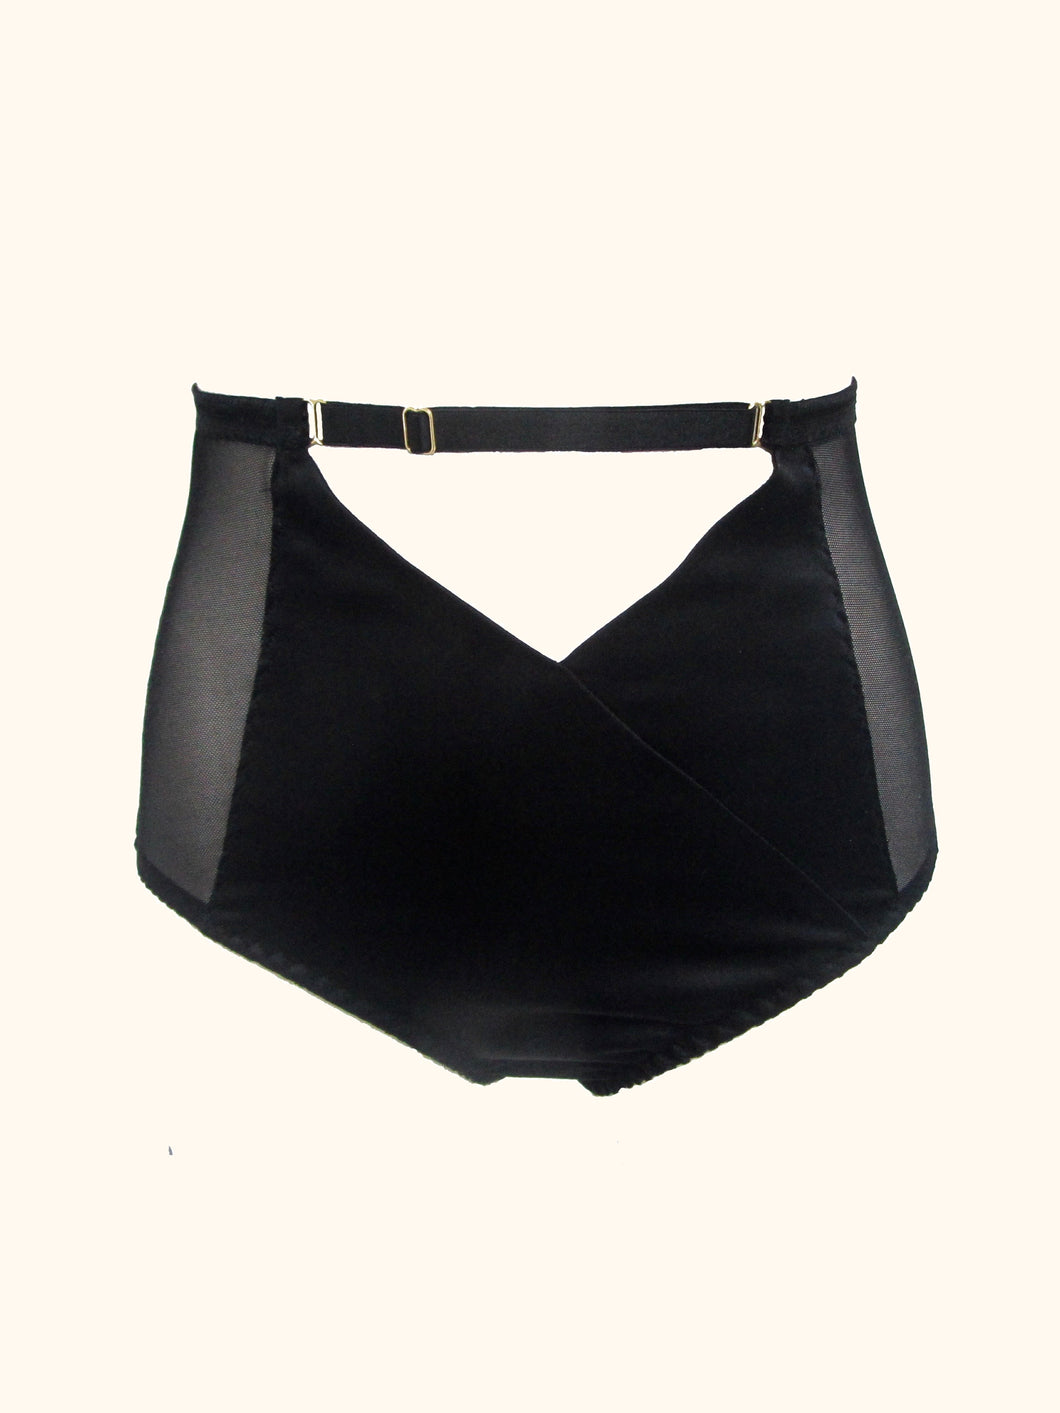 The black silk and mesh Serena knickers from the front. The front panel is silk with a cross over design. This creates an inverted triangle cut out at the front. The sides are sheer mesh.